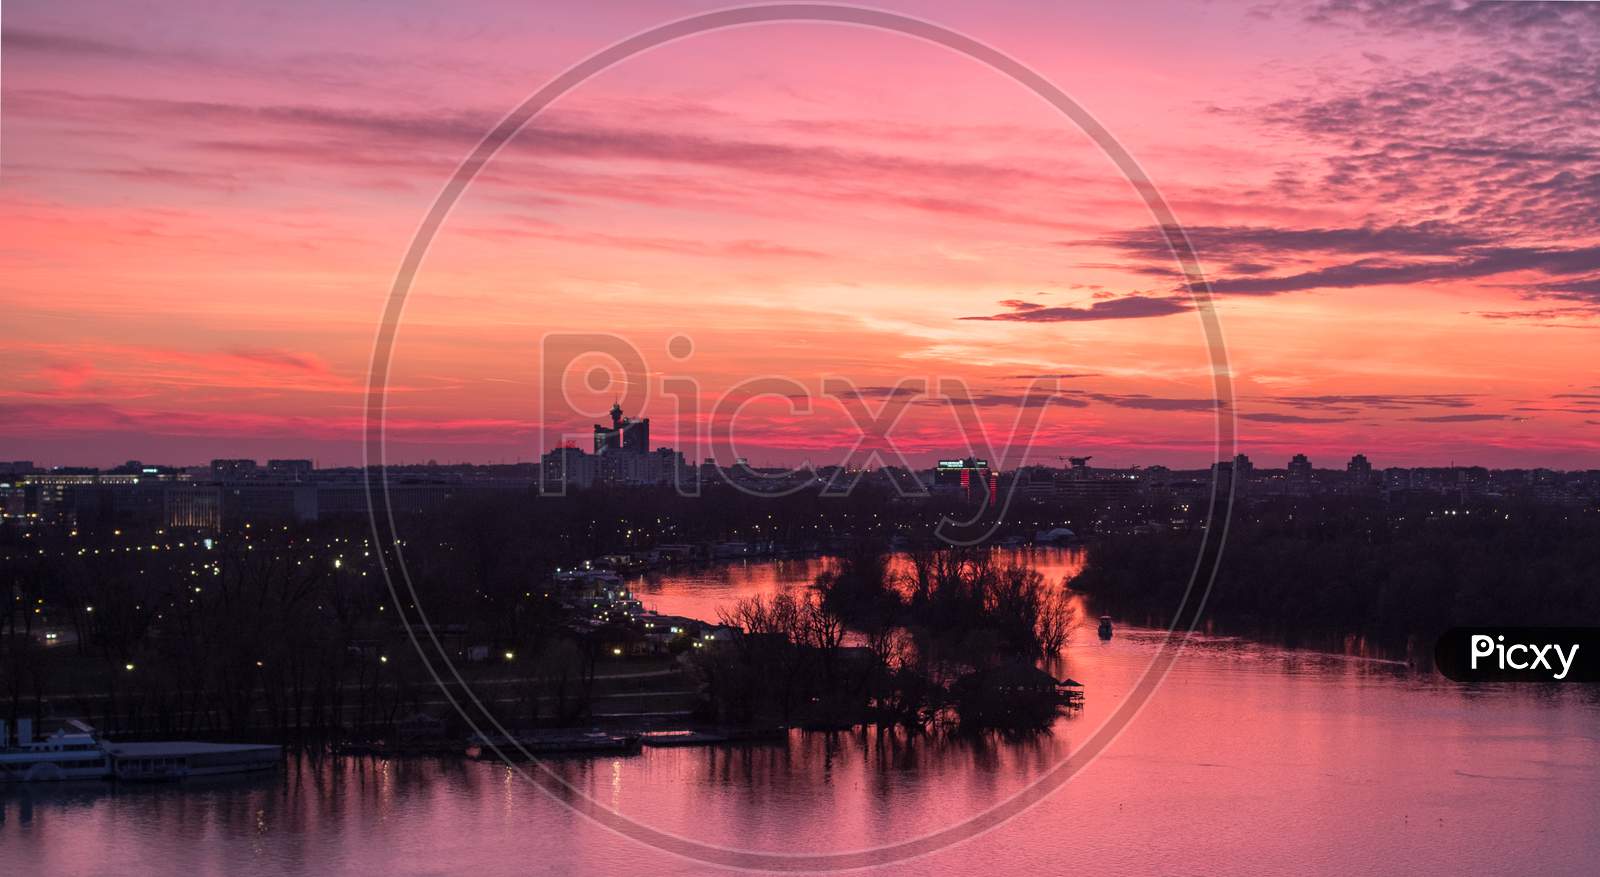 Belgrade / Serbia - March 16, 2019: Belgrade Cityscape And Confluence Of Rivers Danube And Sava At Sunset, View From Belgrade Fortress Kalemegdan